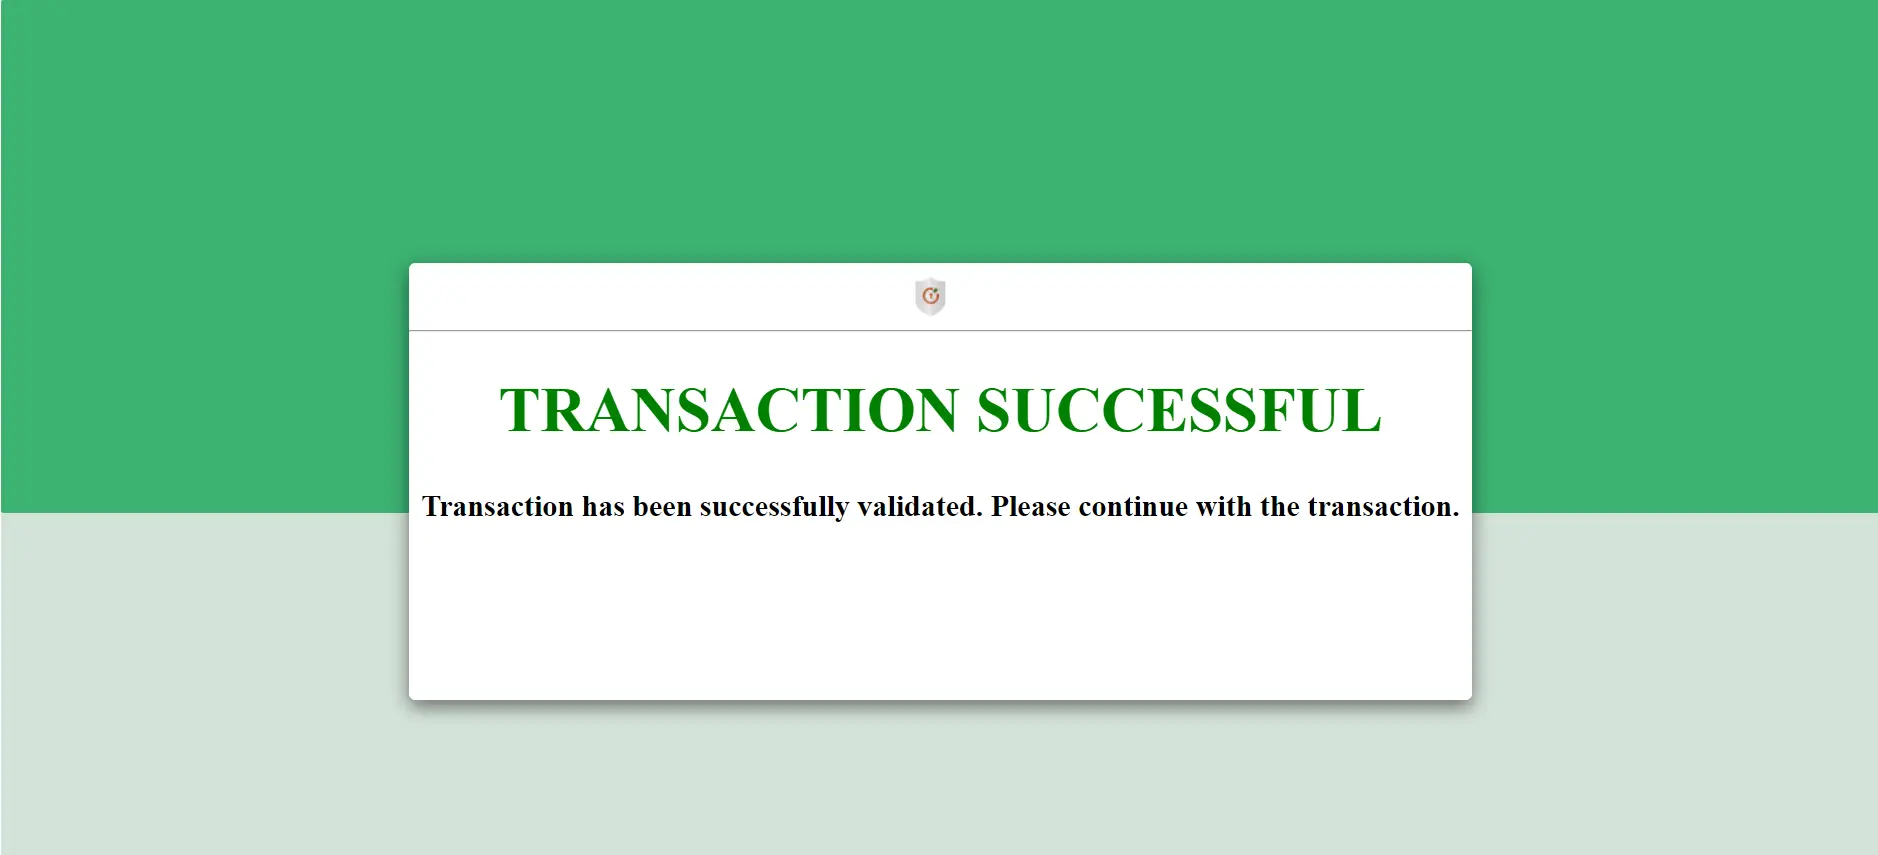 Email Verification - Transaction successfully